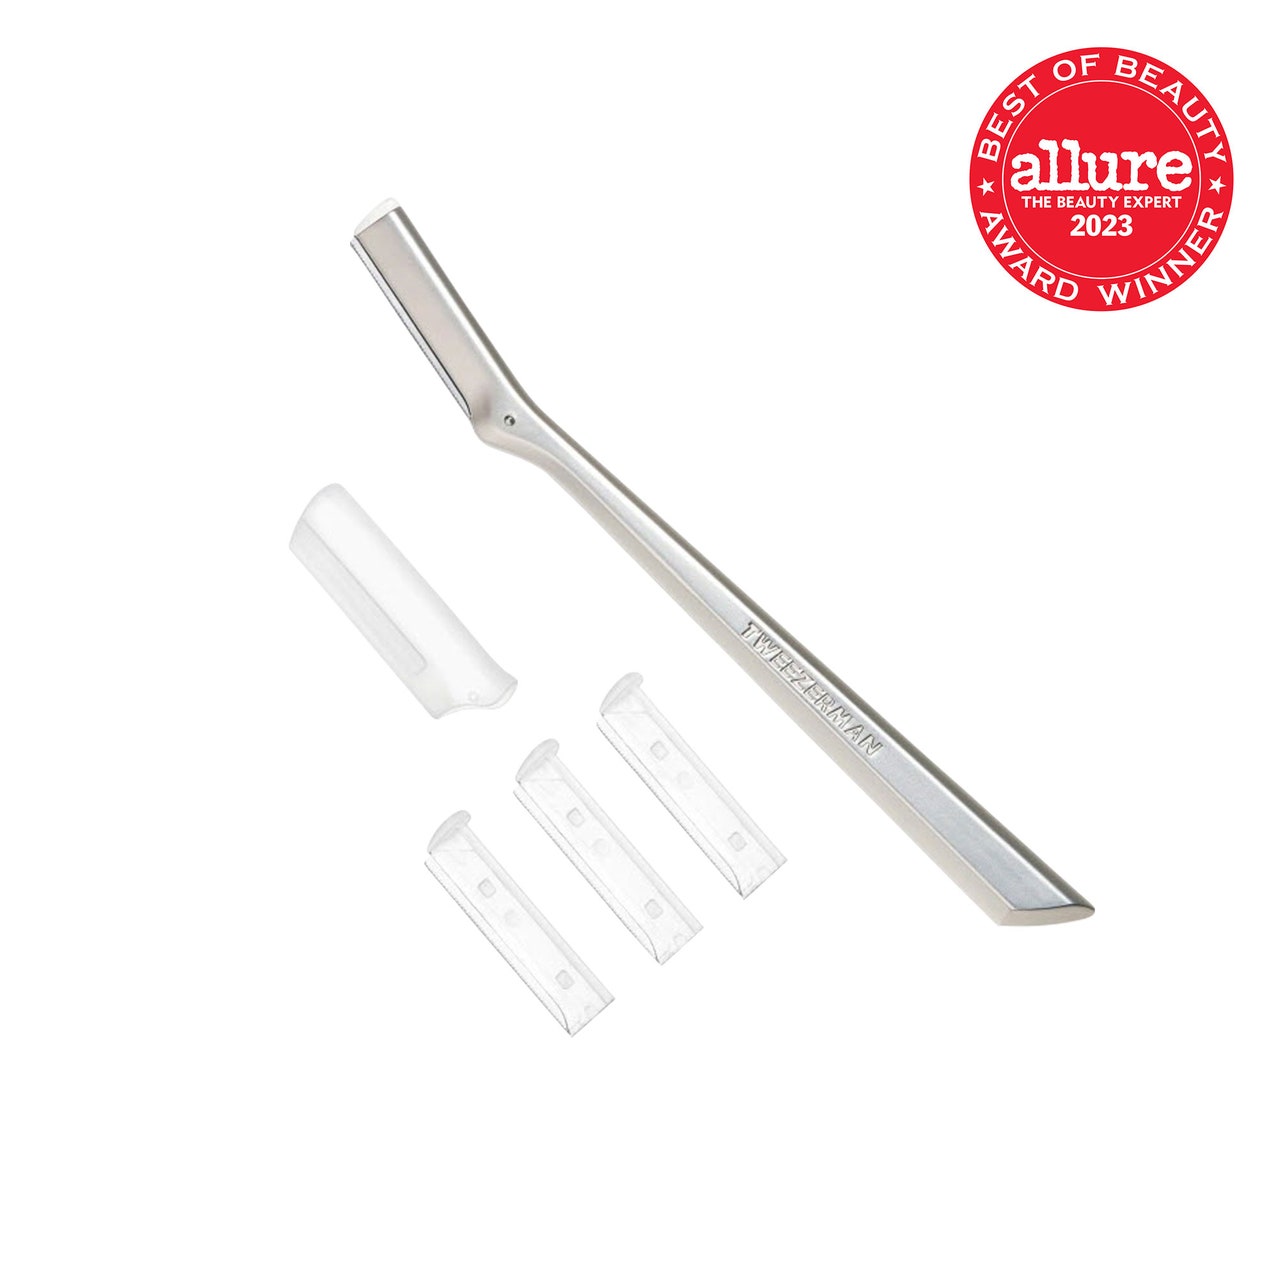 Tweezerman Facial Razor silver one blade facial razor with four plastic blade covers on white background with red Allure BoB seal in the top right corner